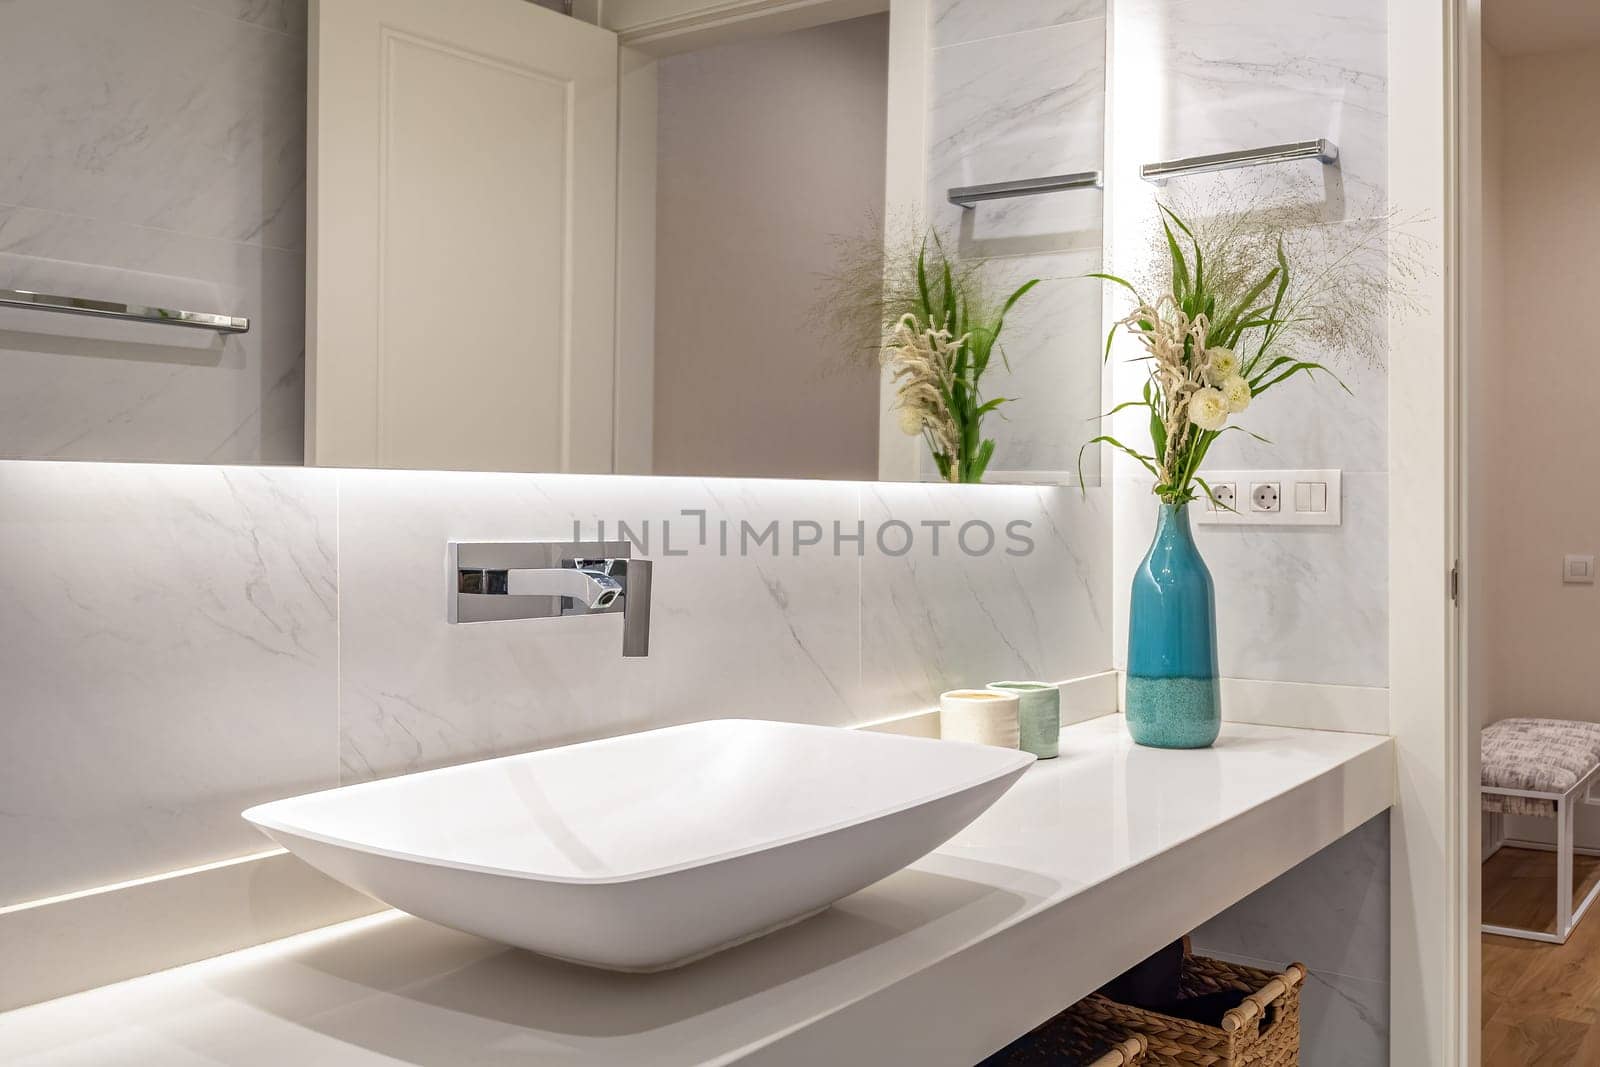 Interior design of a luxury bathroom and flowers in blue vase